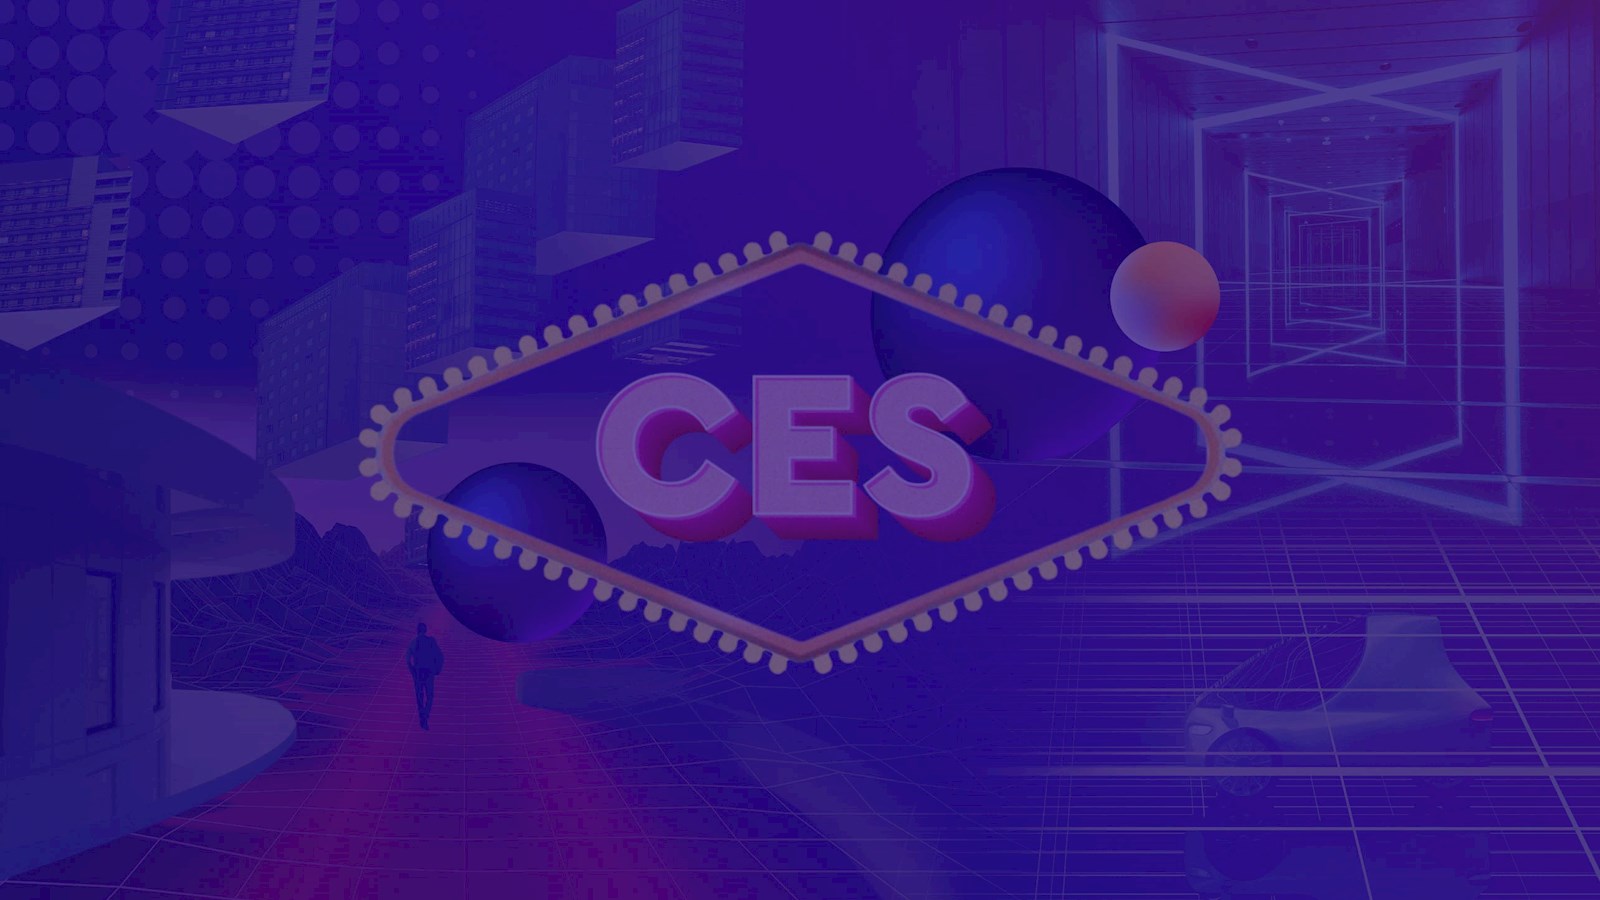 Text "CES" overlaid on a background of future-facing technology